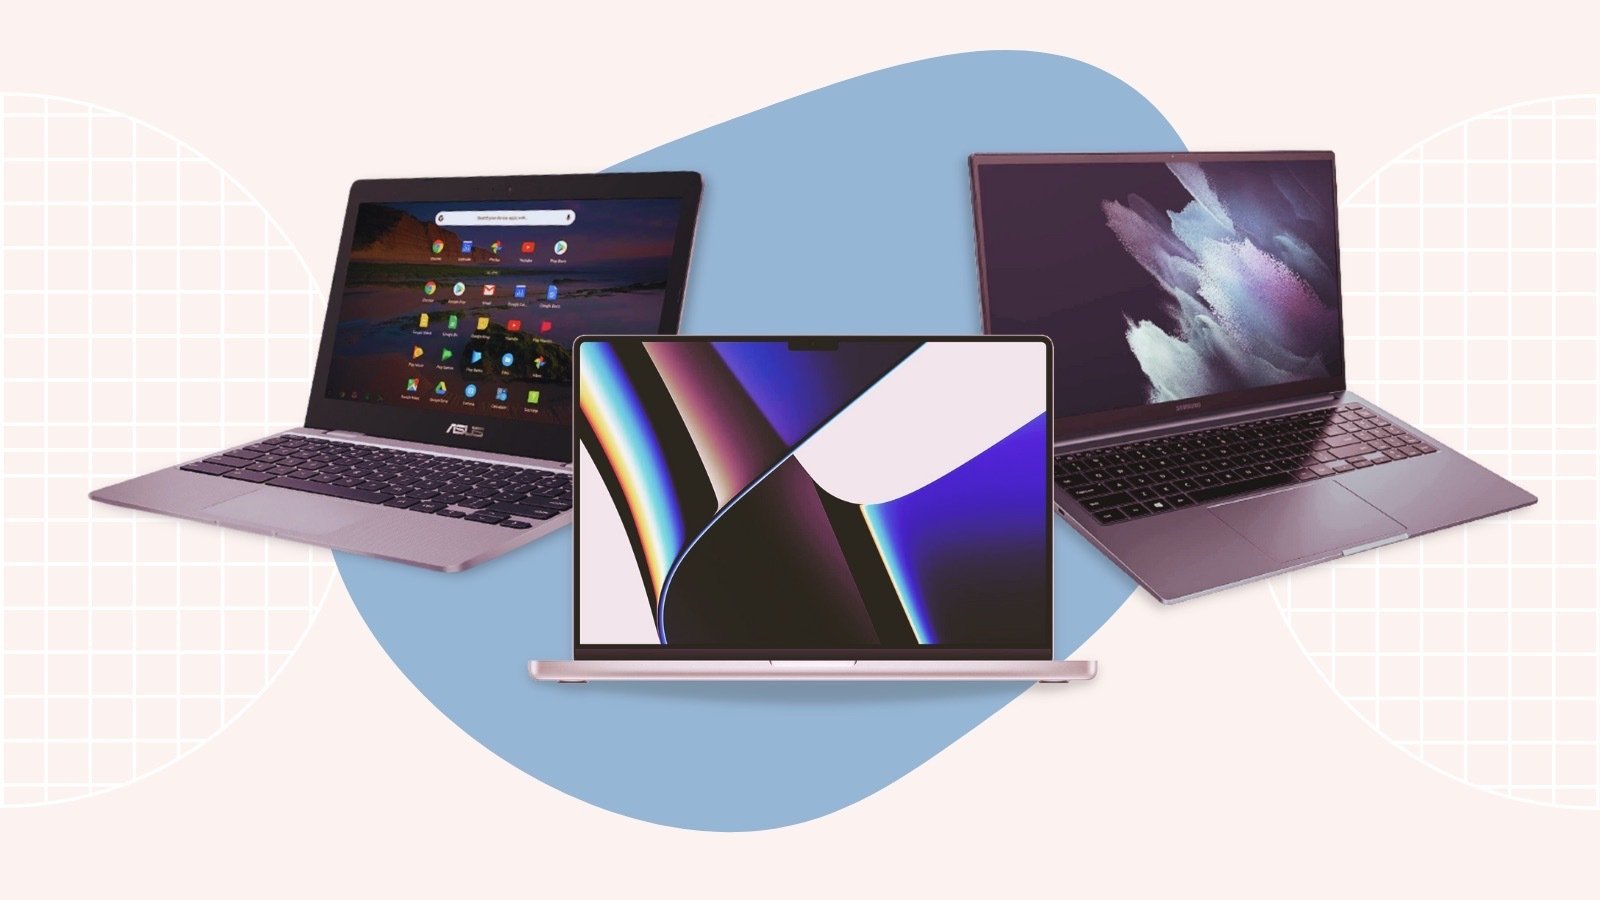 Amazon’s best Cyber Monday 2022 laptop deals (so far) include a bunch of MacBooks and Samsung Galaxy Books